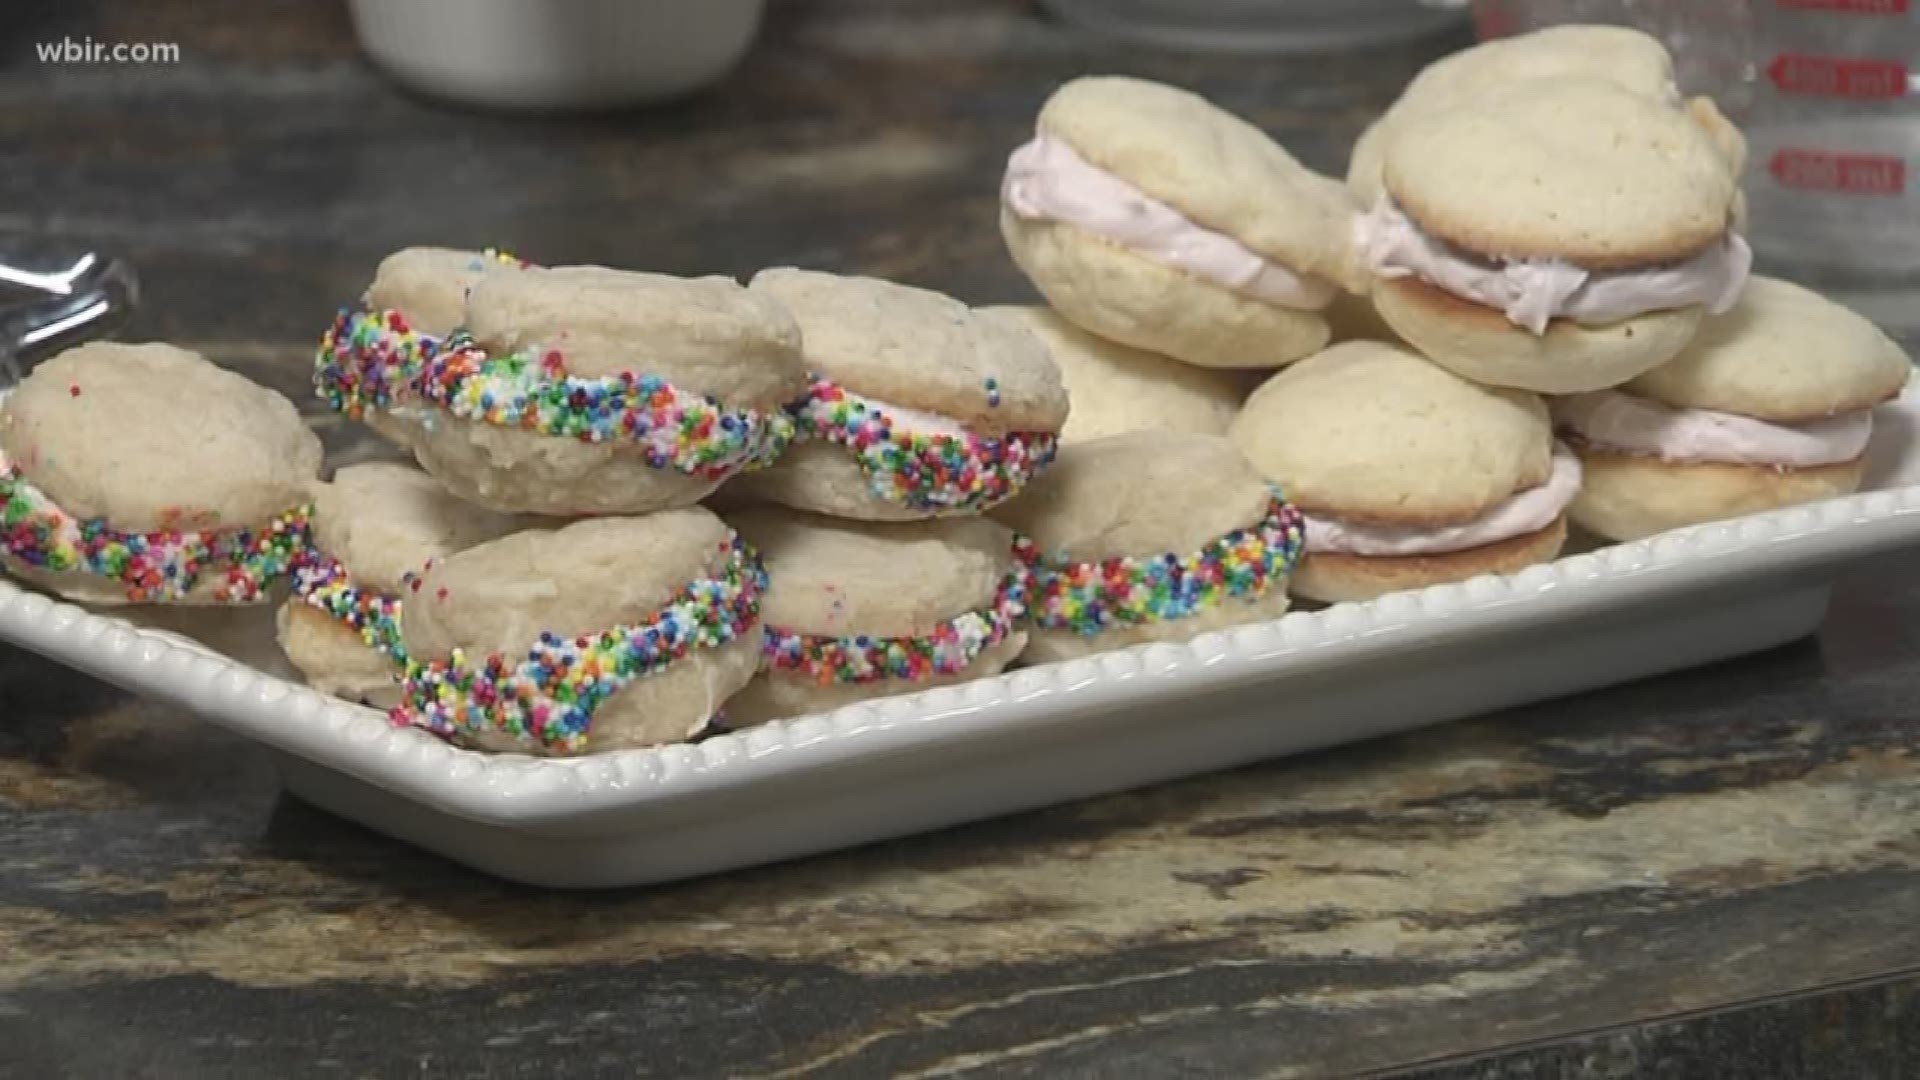 Do you need a dessert for your sweetheart this Valentine's Day? Betty Henry is here with a recipe for you!